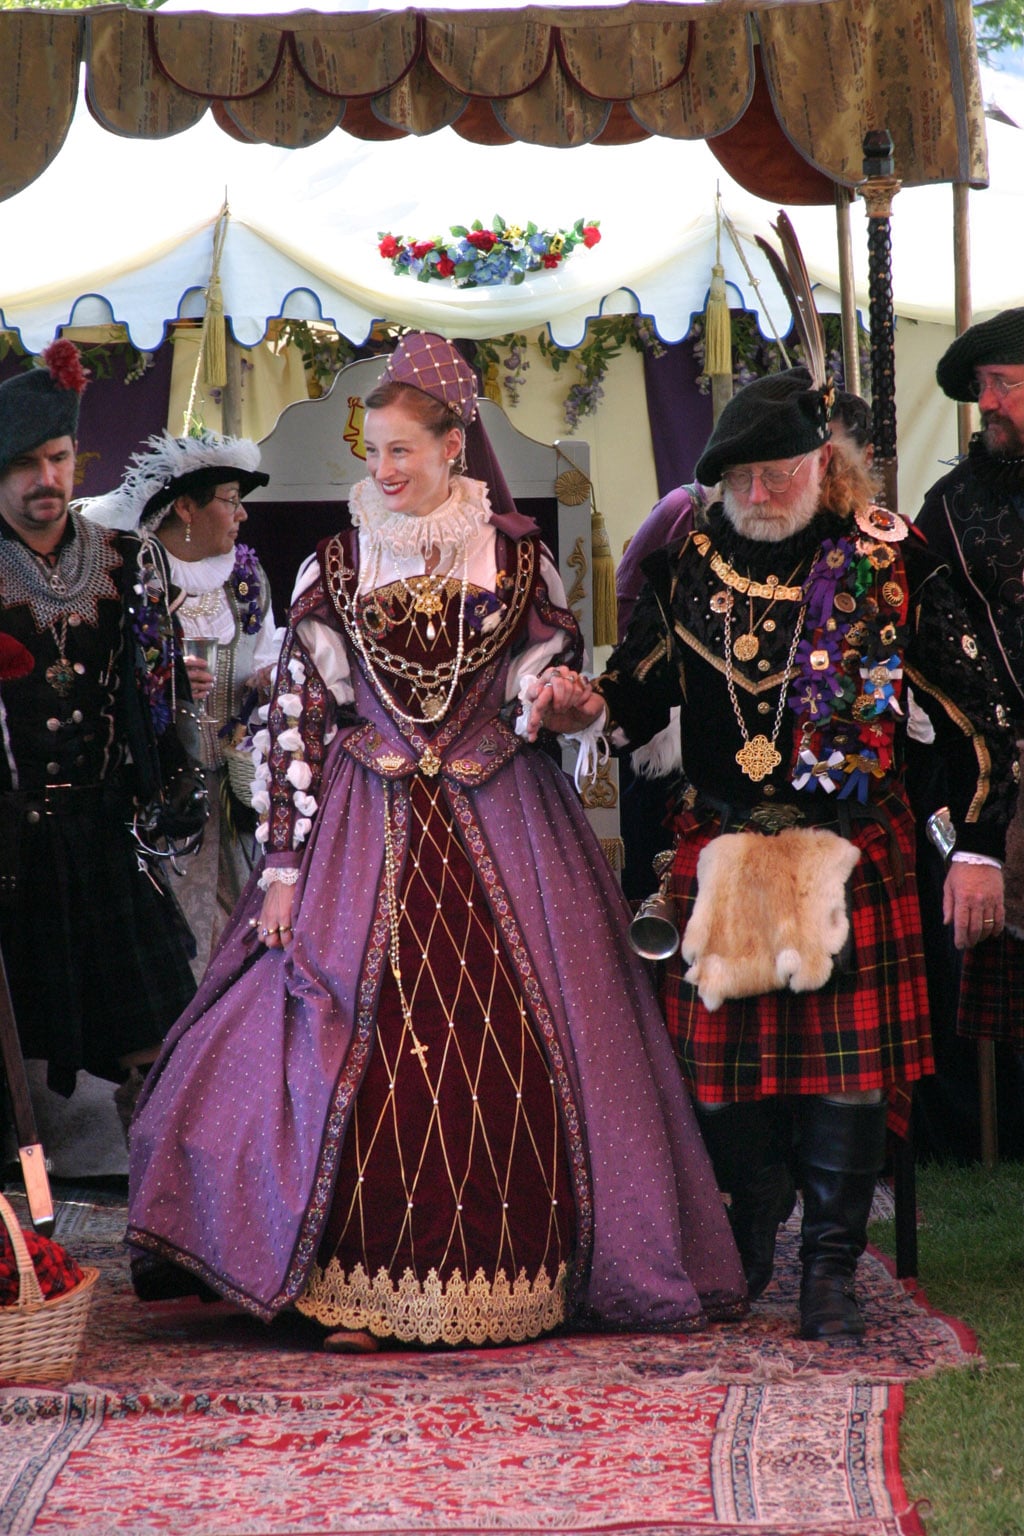 Image of an actress playing Mary Queen of Scots at a Scottish Faire. Photo: David Ball